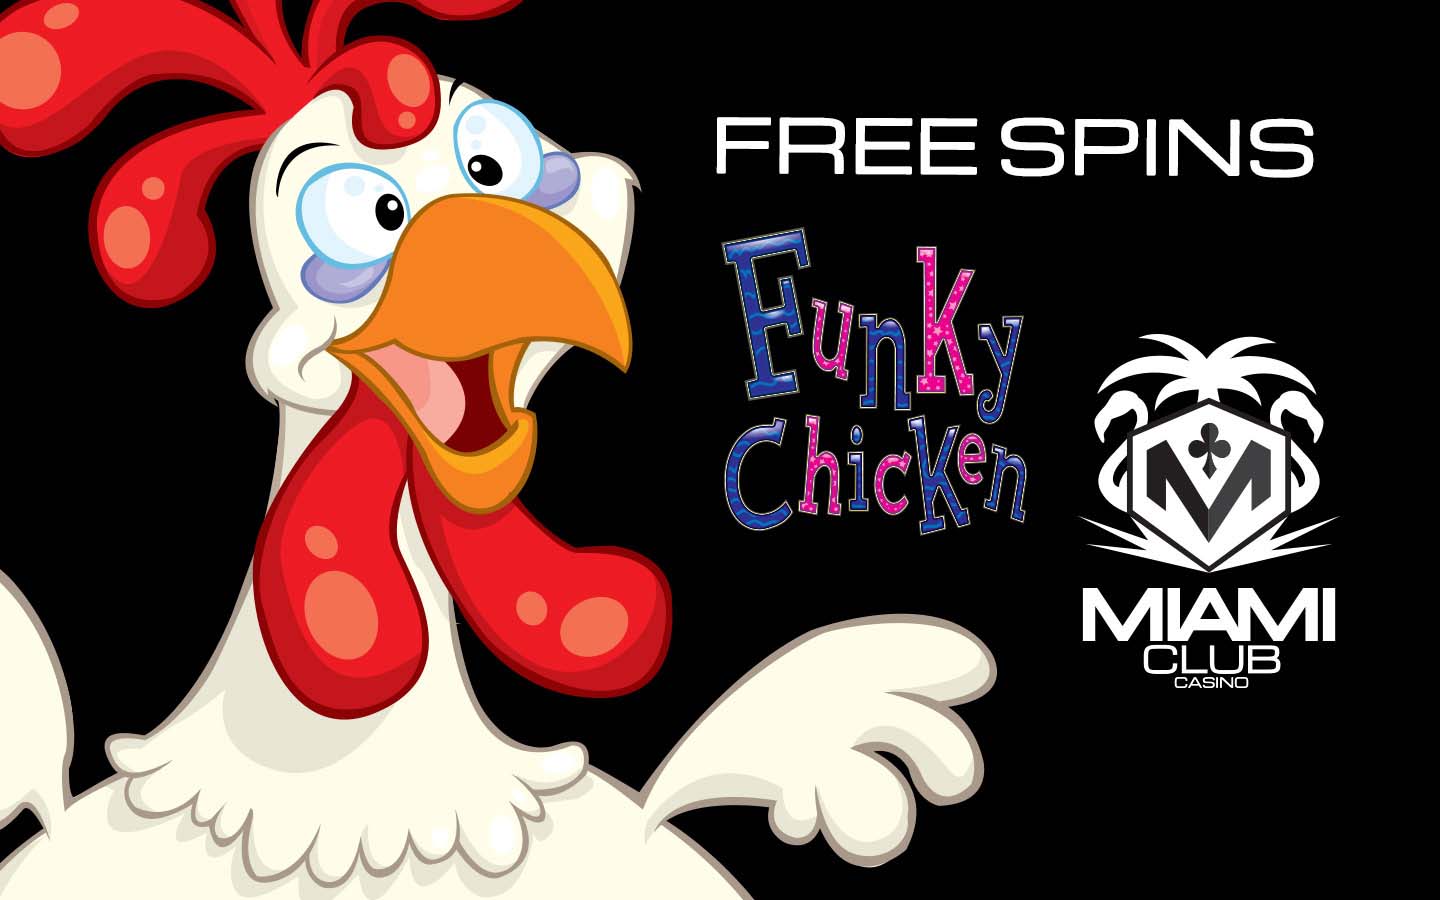 Funky free spins at Miami Club casino